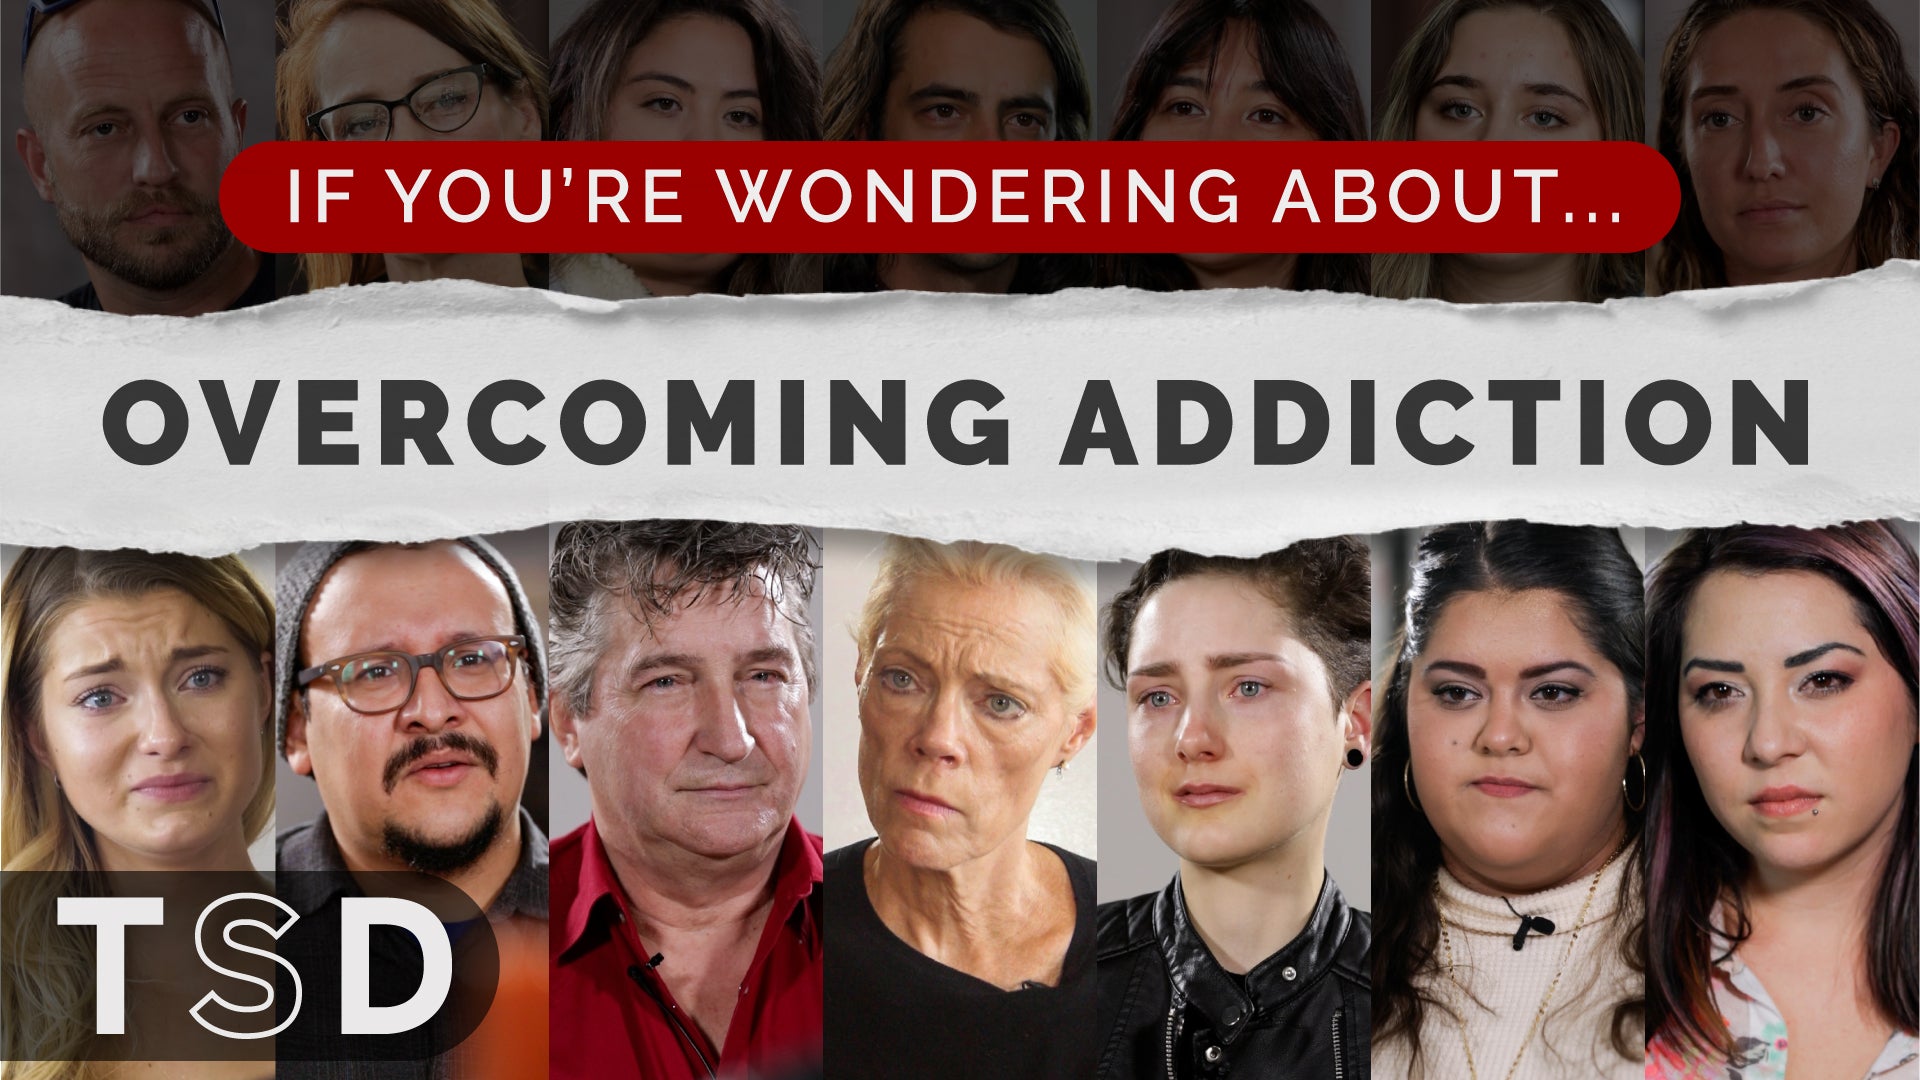 [VIDEO] If You're Wondering About: Overcoming Addiction